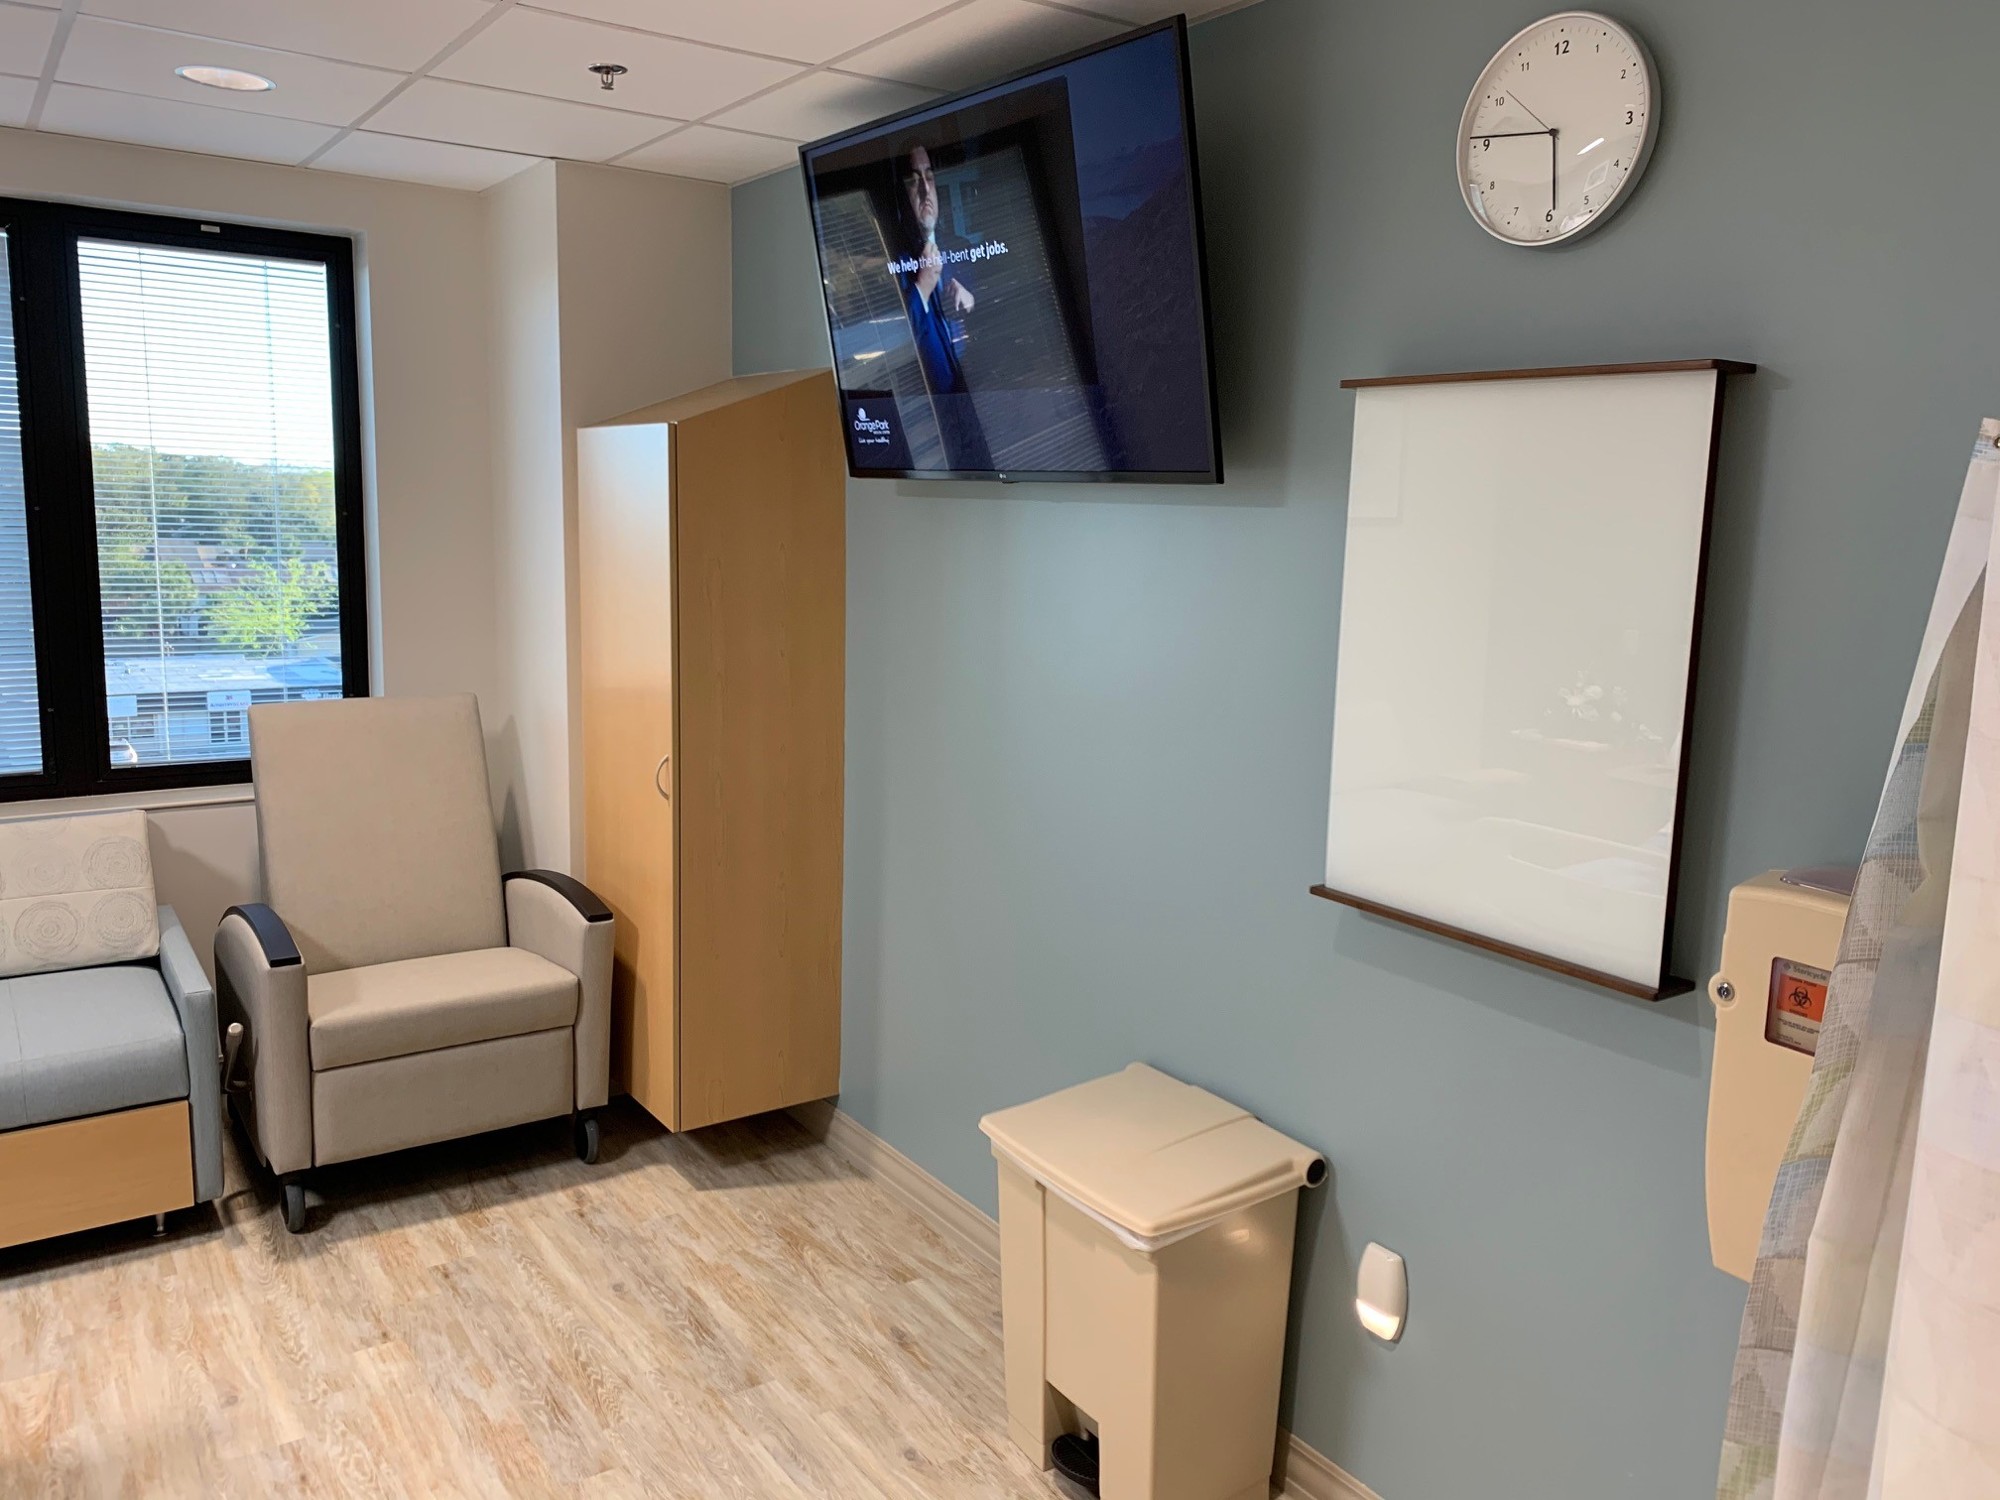 Each patient room comes equipped with an Apple TV.